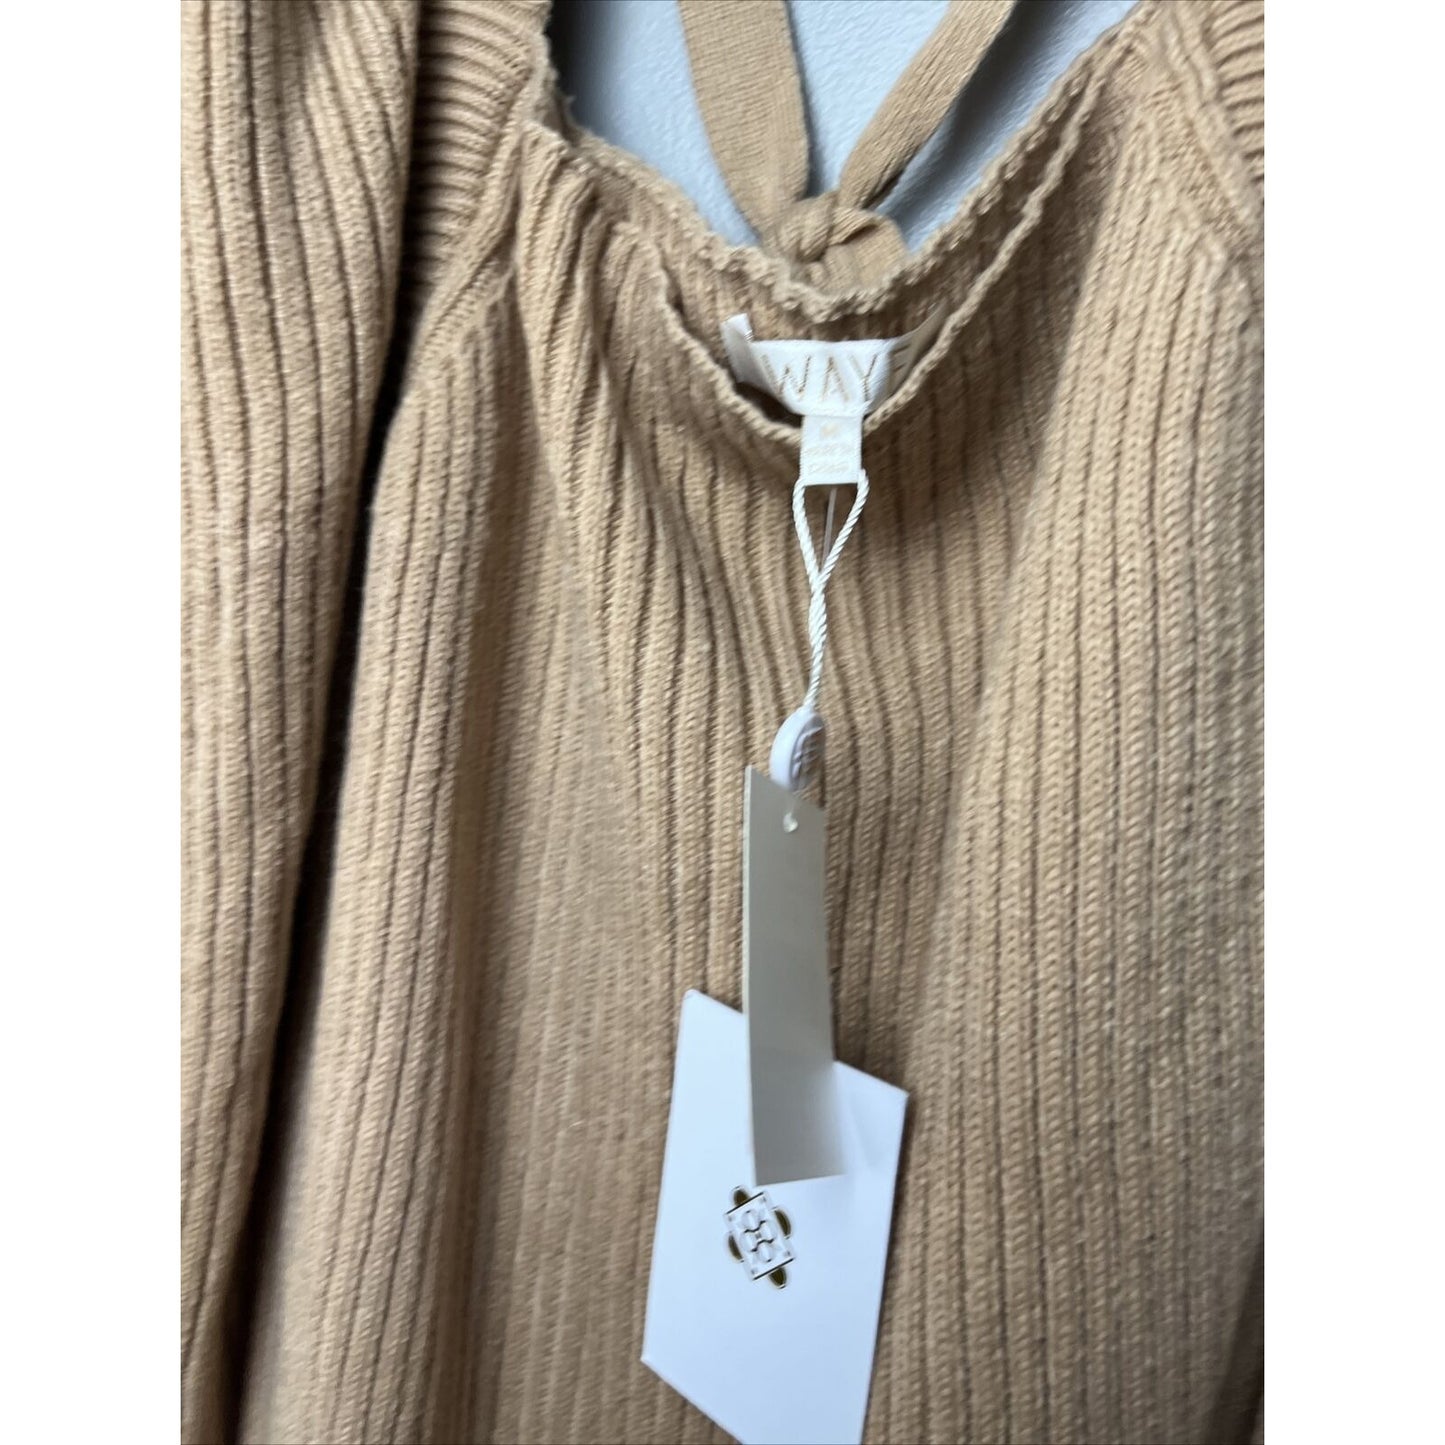 Wayf NWT M Camel Square Neck Puff Shoulder ribbed Sweater Dress